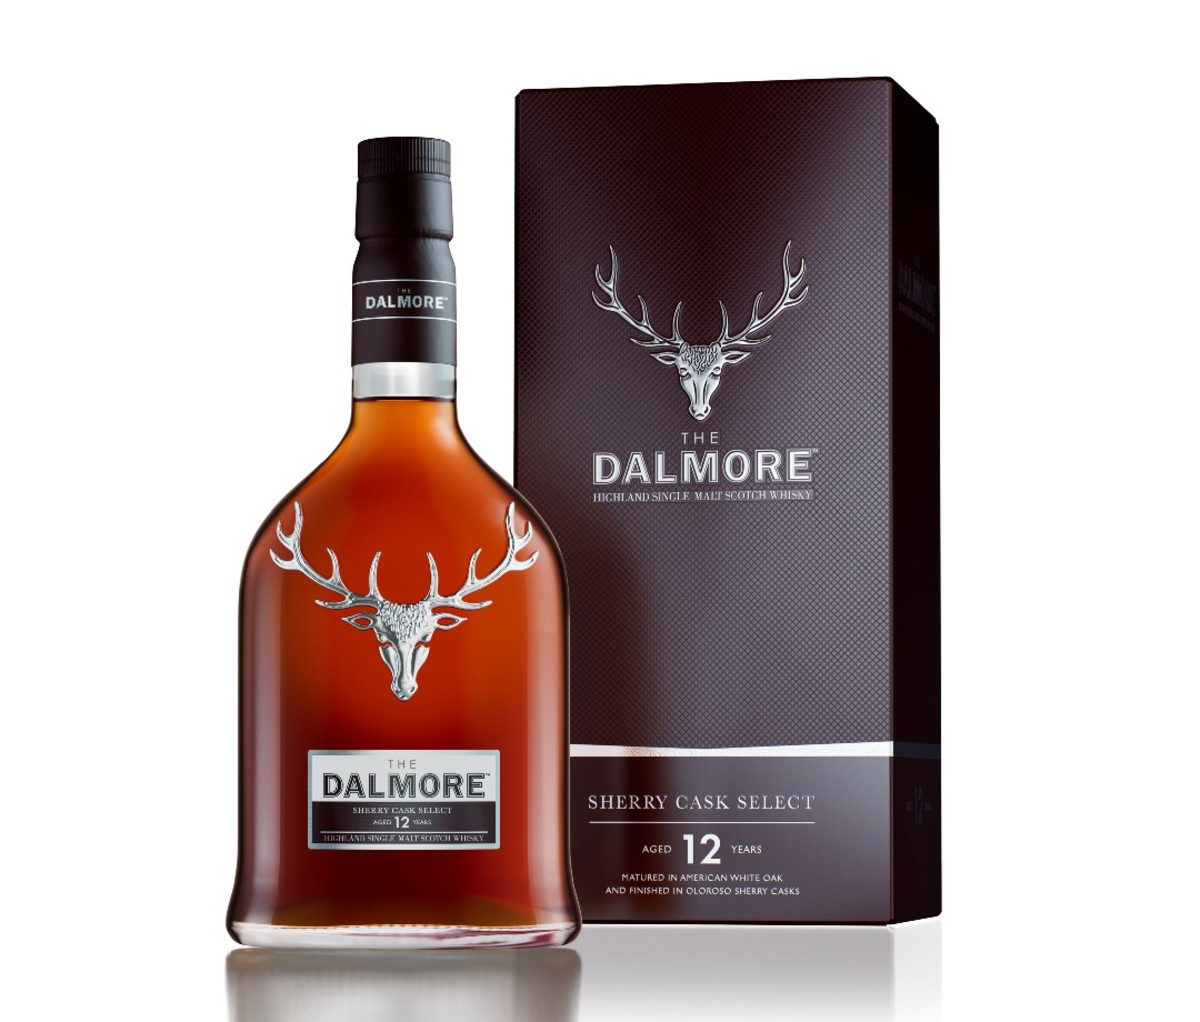 A bottle of Dalmore 12-Year-Old Sherry Cask Select alongside its box. Both have an image of an elk head.